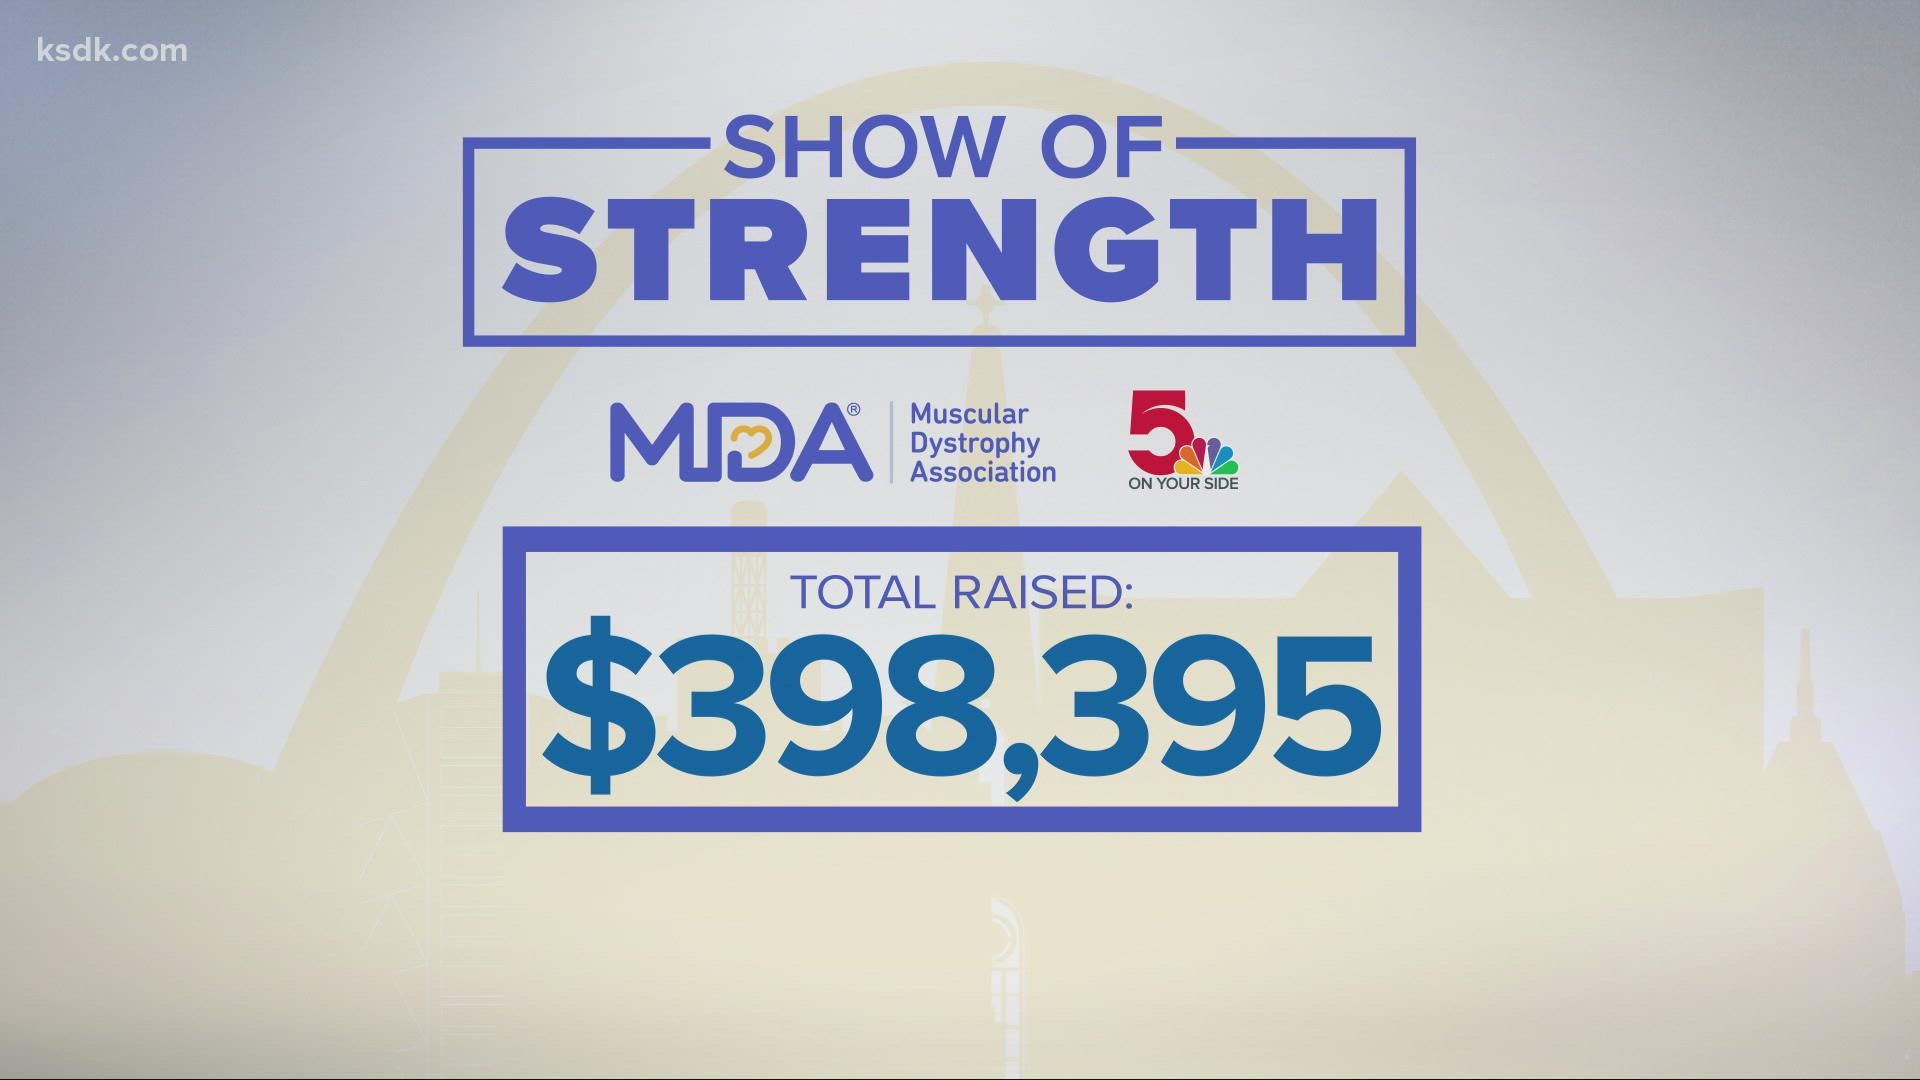 KSDK is hosting the MDA fundraiser to help people with neuromuscular diseases living in the St. Louis community. Text GiveMDA to 314-425-5355